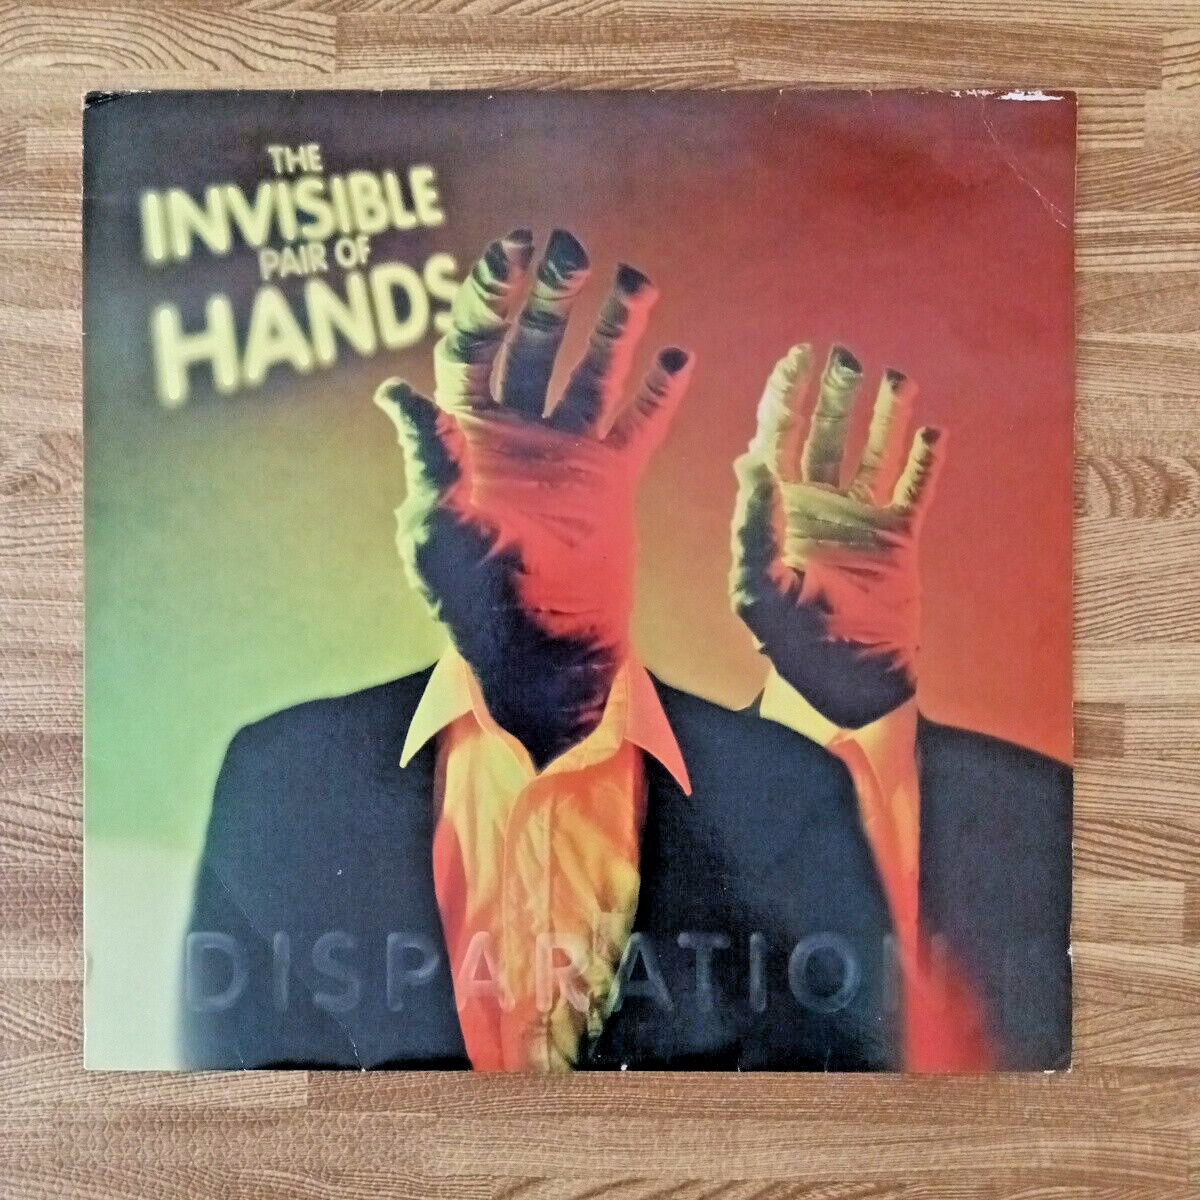 The Invisible Pair Of Hands - Disparation (1997) Cup Of Tea Records VINYL RARE